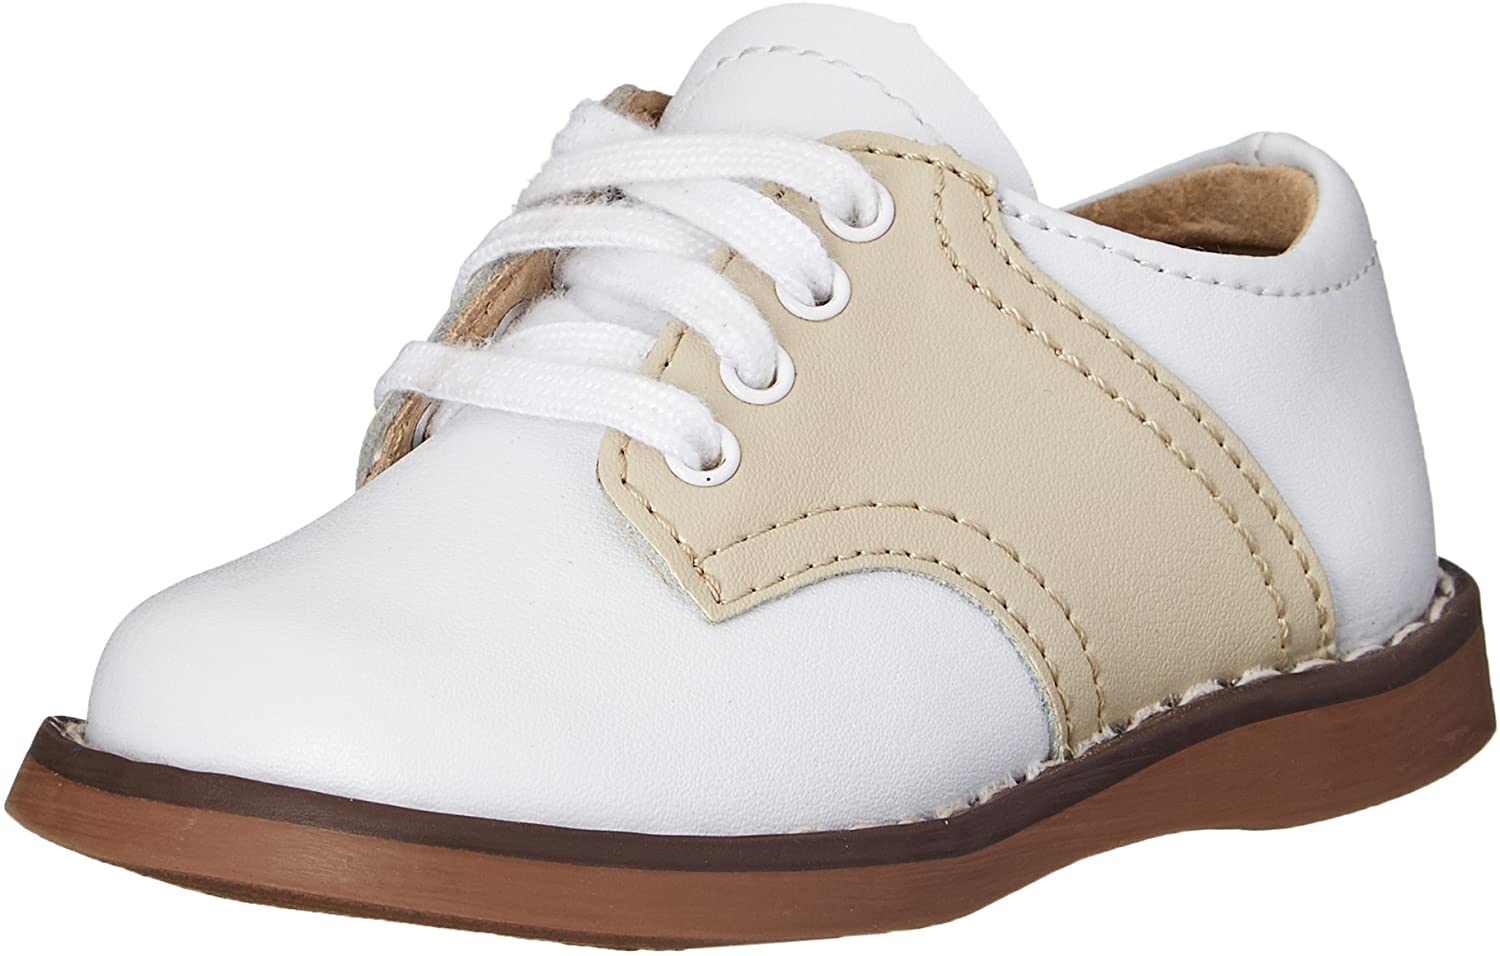 Footmates Cheer Infant Shoe (age 0-24 months) in White/Ecru view from the front